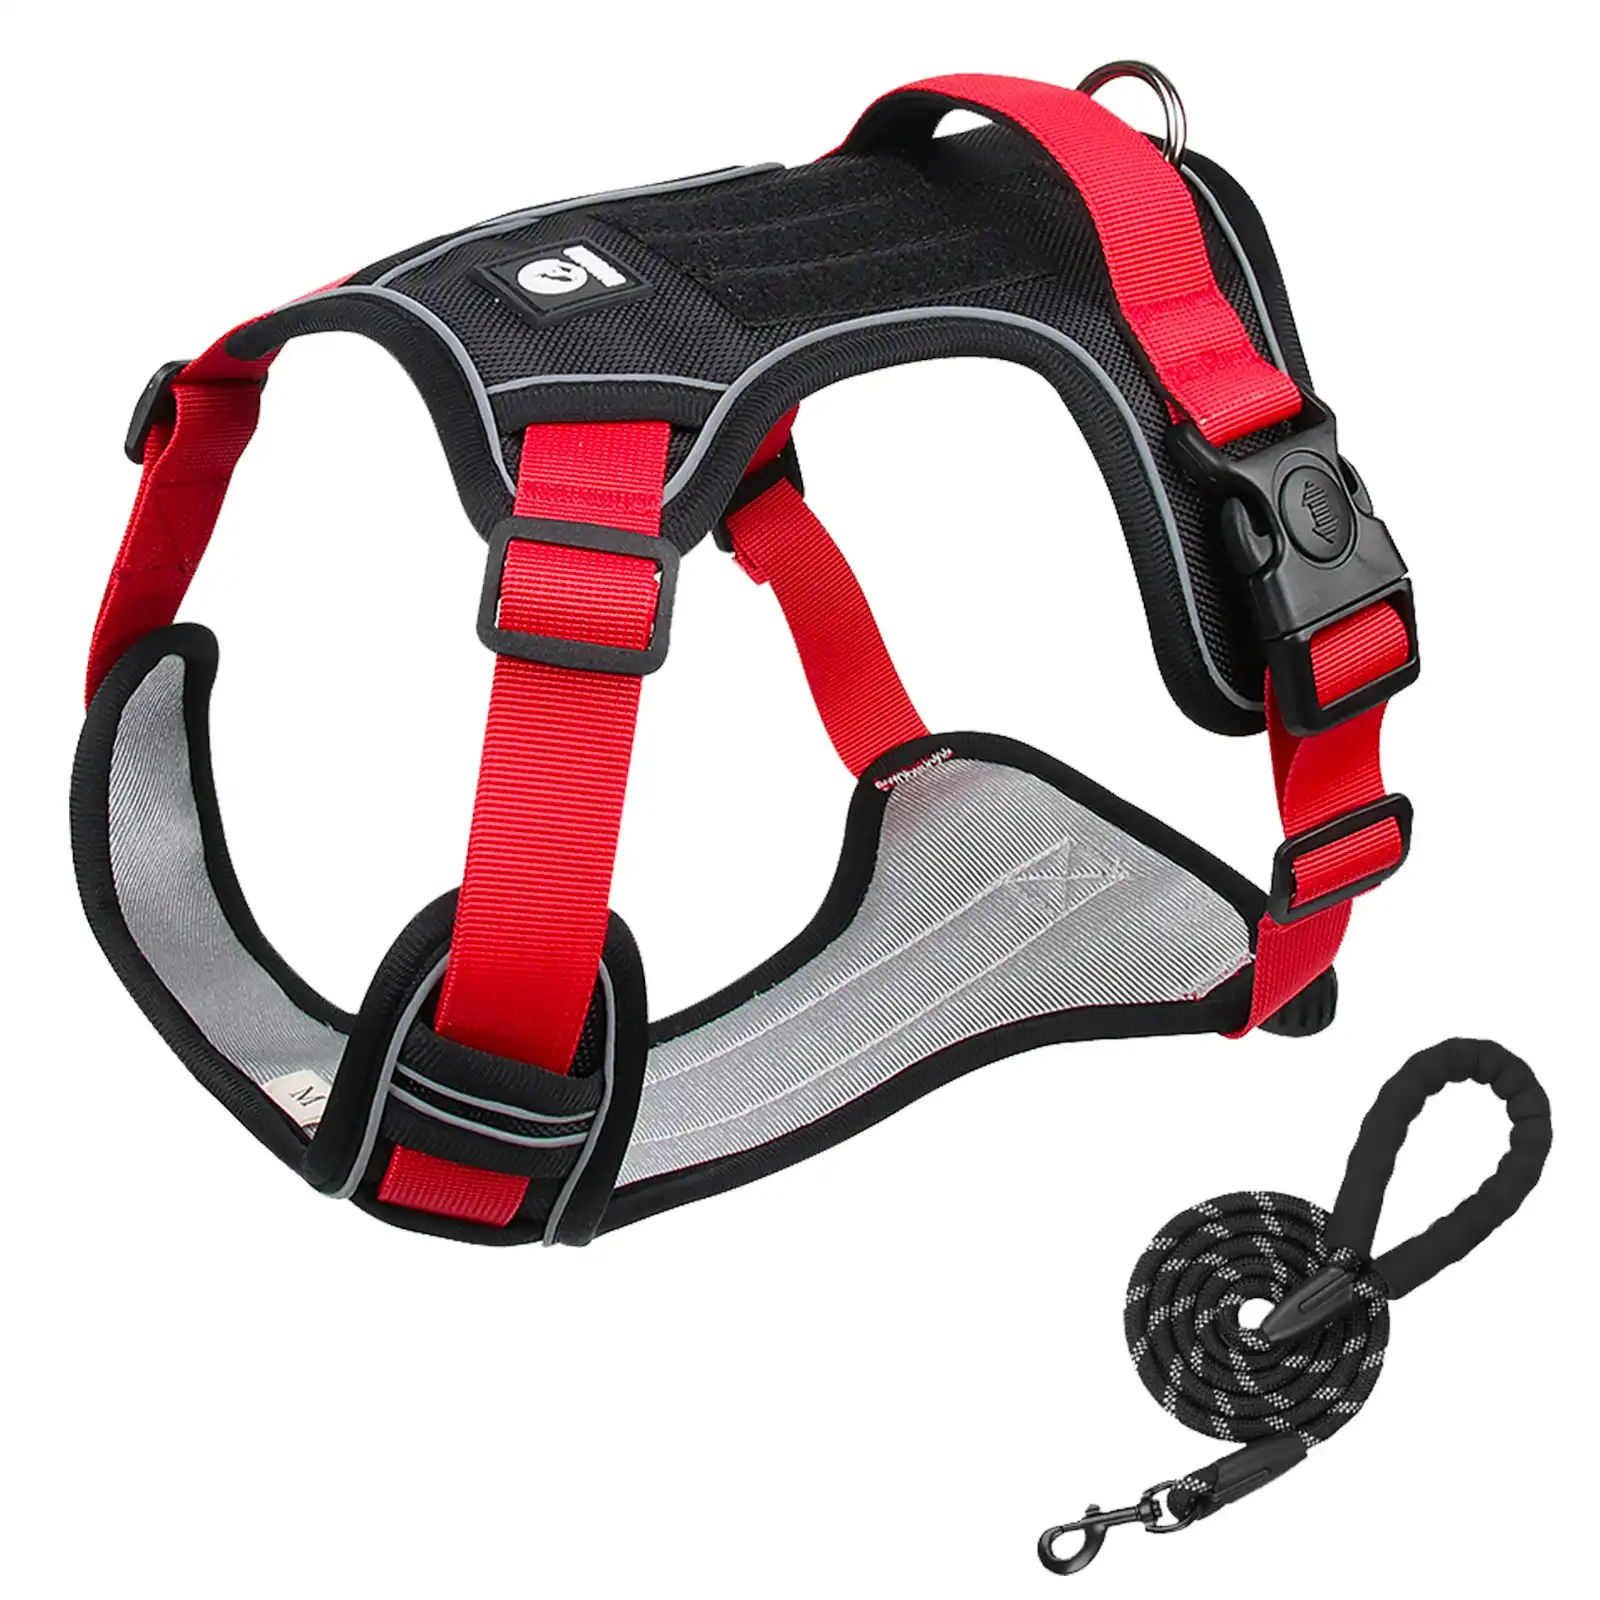 Furbulous Tactical Dog Harness Adjustable No Pull Pet Harness Reflective Working Training Dog Harness with 1.5m Lead - Red XL